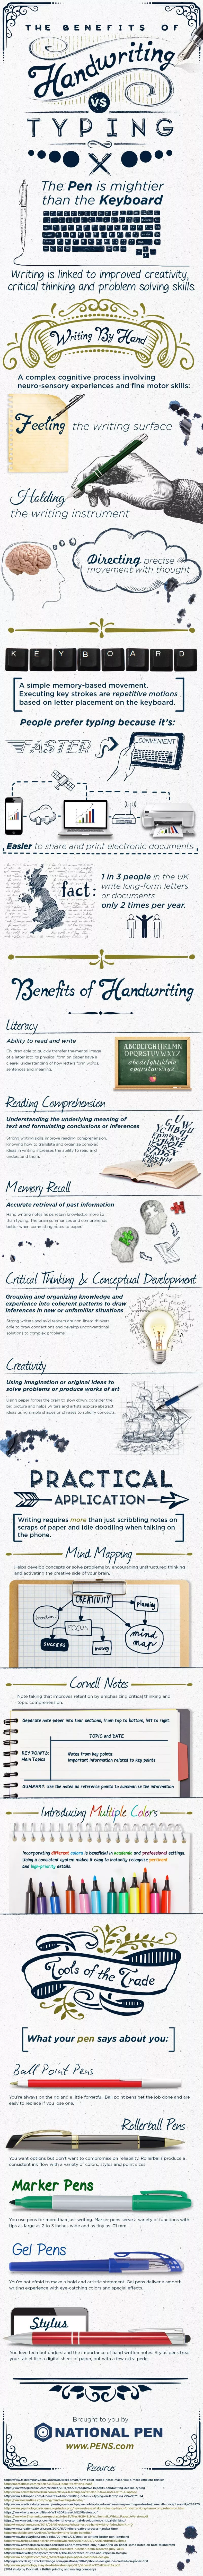 The Benefits of Handwriting vs Typing Infographic